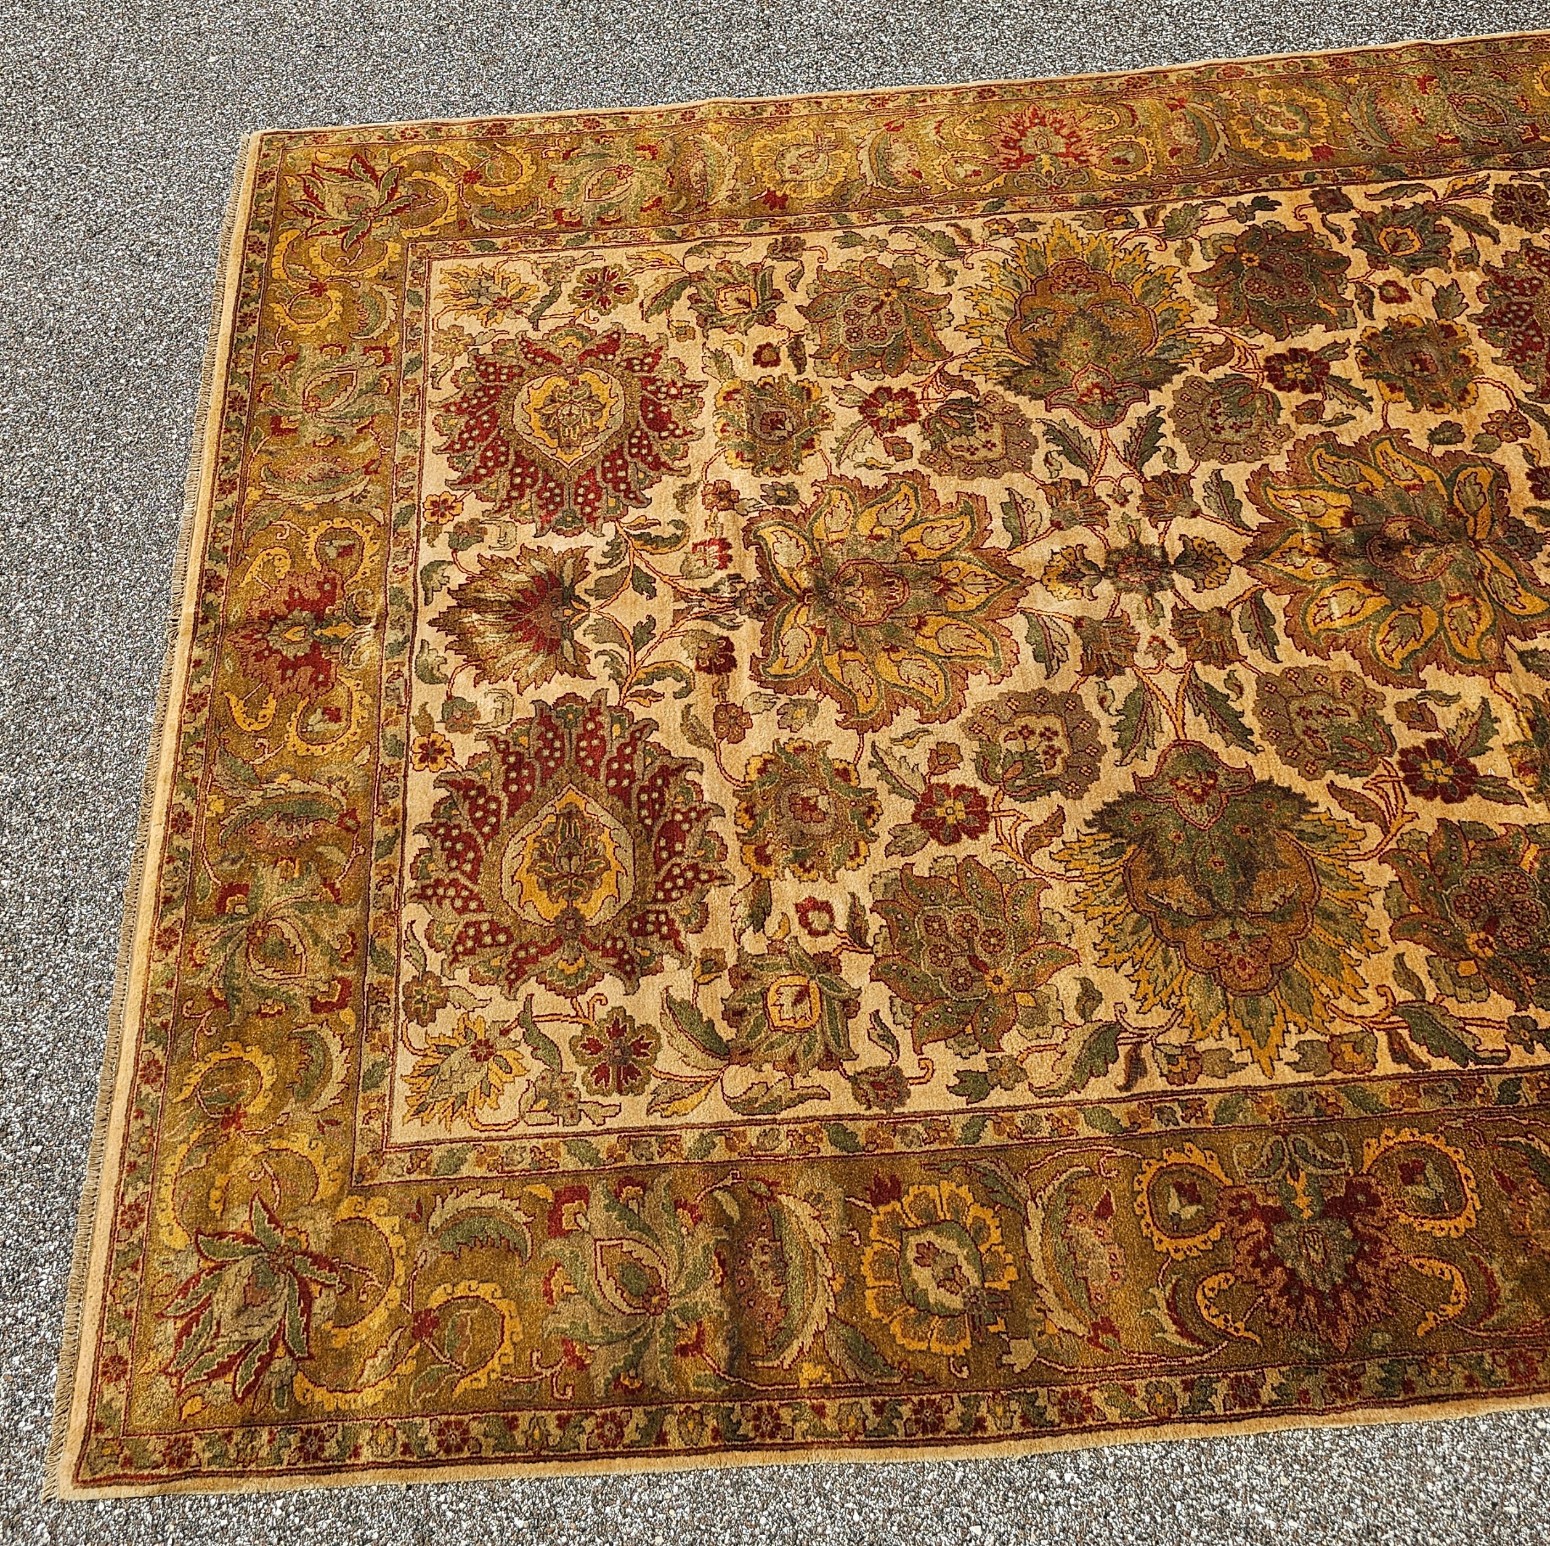 Fine Mahal Hand-Knotted Wool Rug - 9' x 11'10" - Image 3 of 9